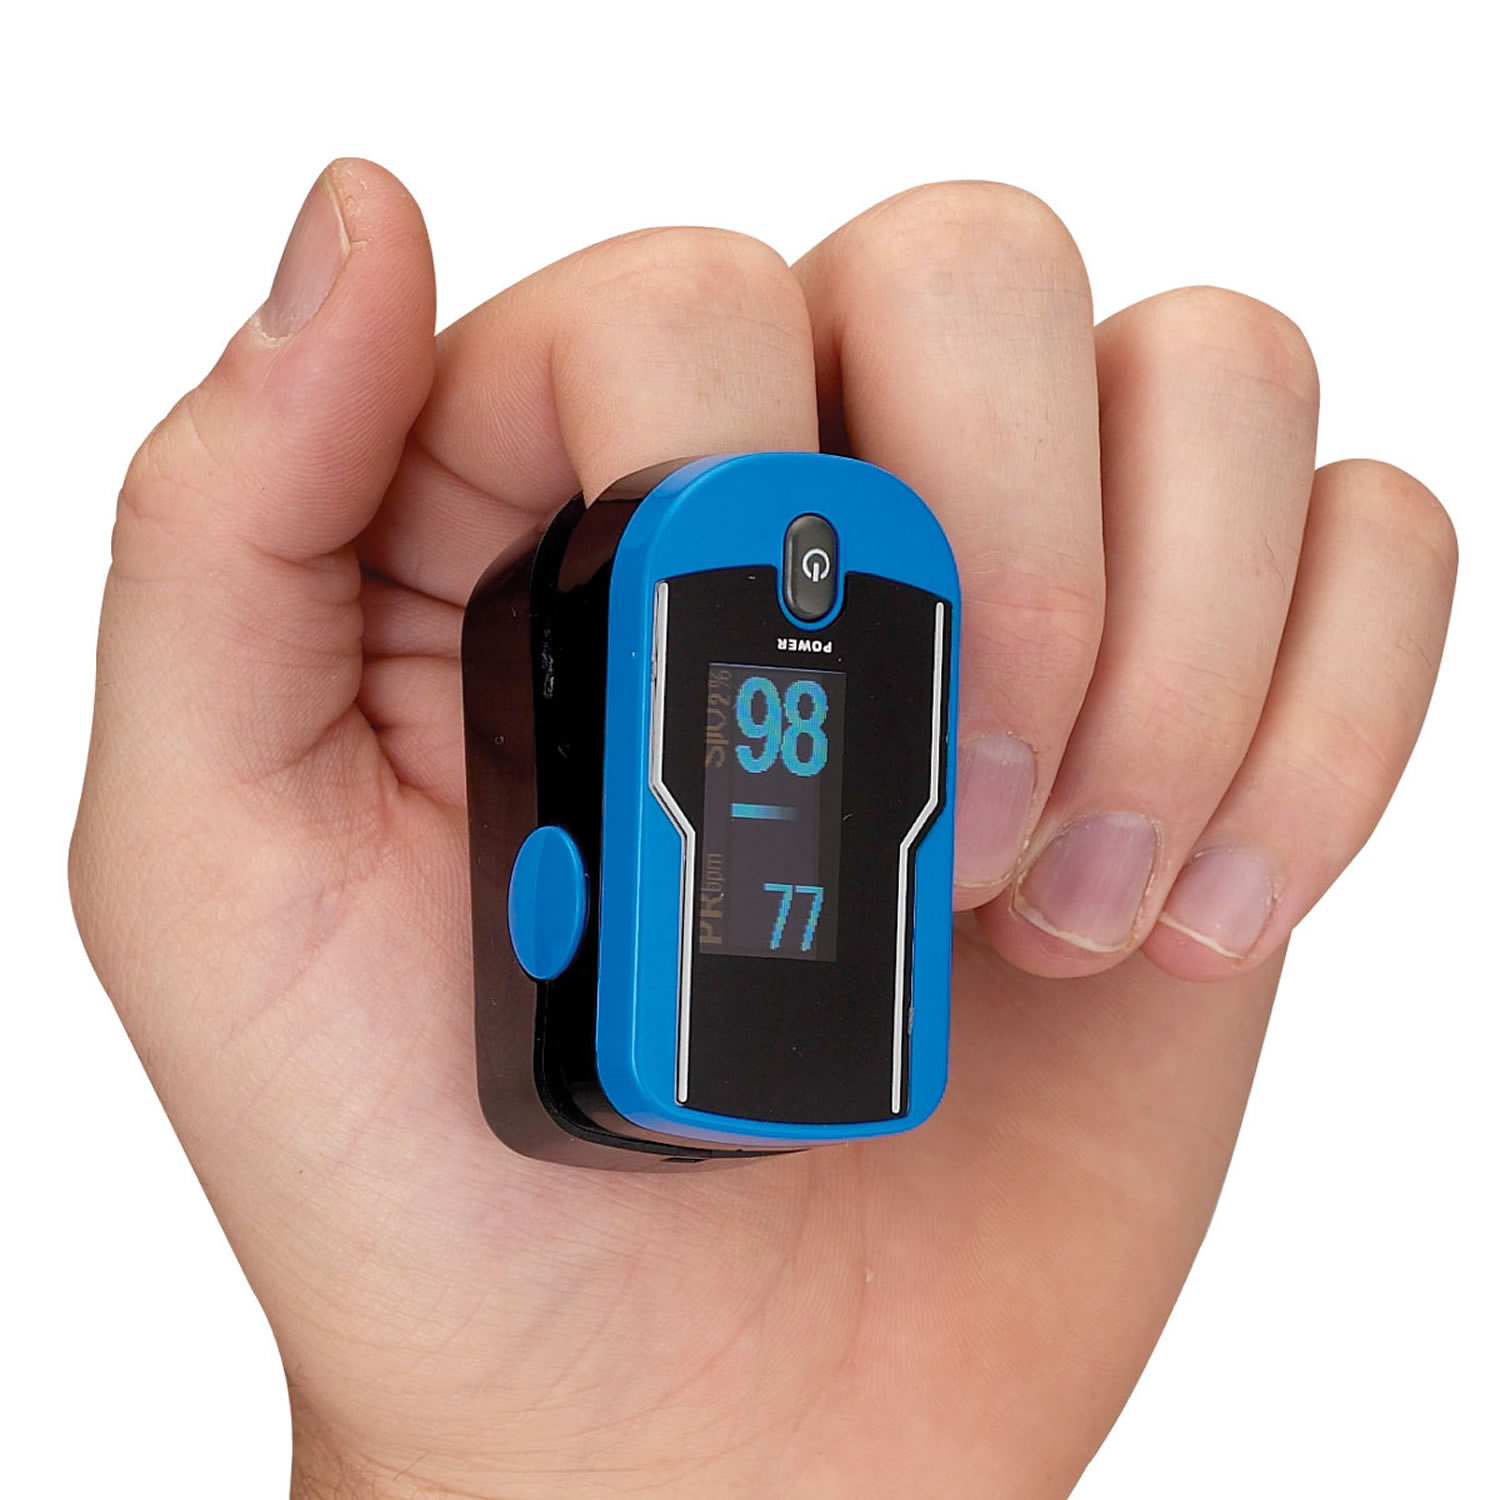 Oximeter readings range pulse normal What is